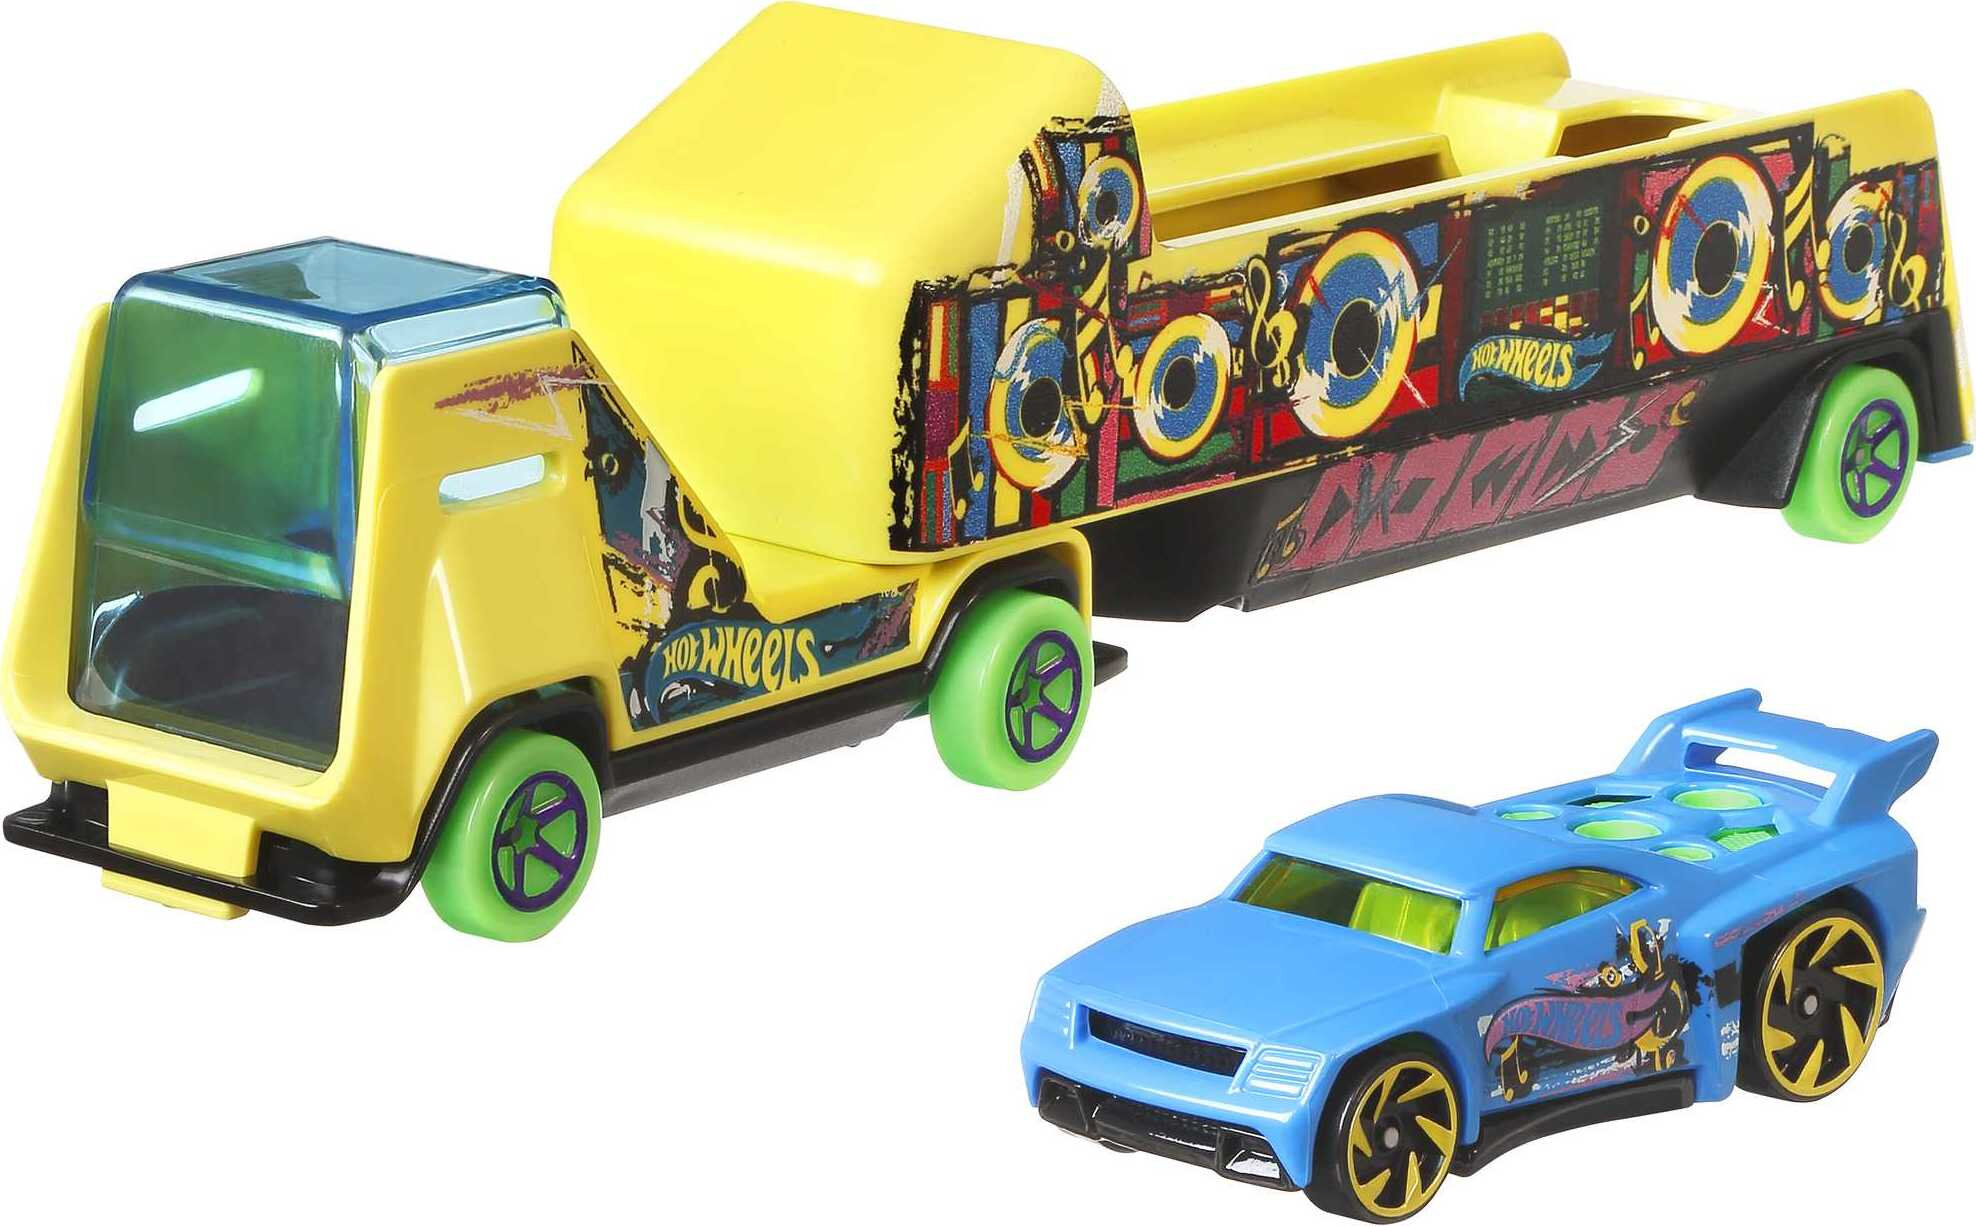 Hot Wheels Super Rigs, Toy Transporter Truck & Toy Car in 1:64 Scale (Styles May Vary) - image 3 of 6